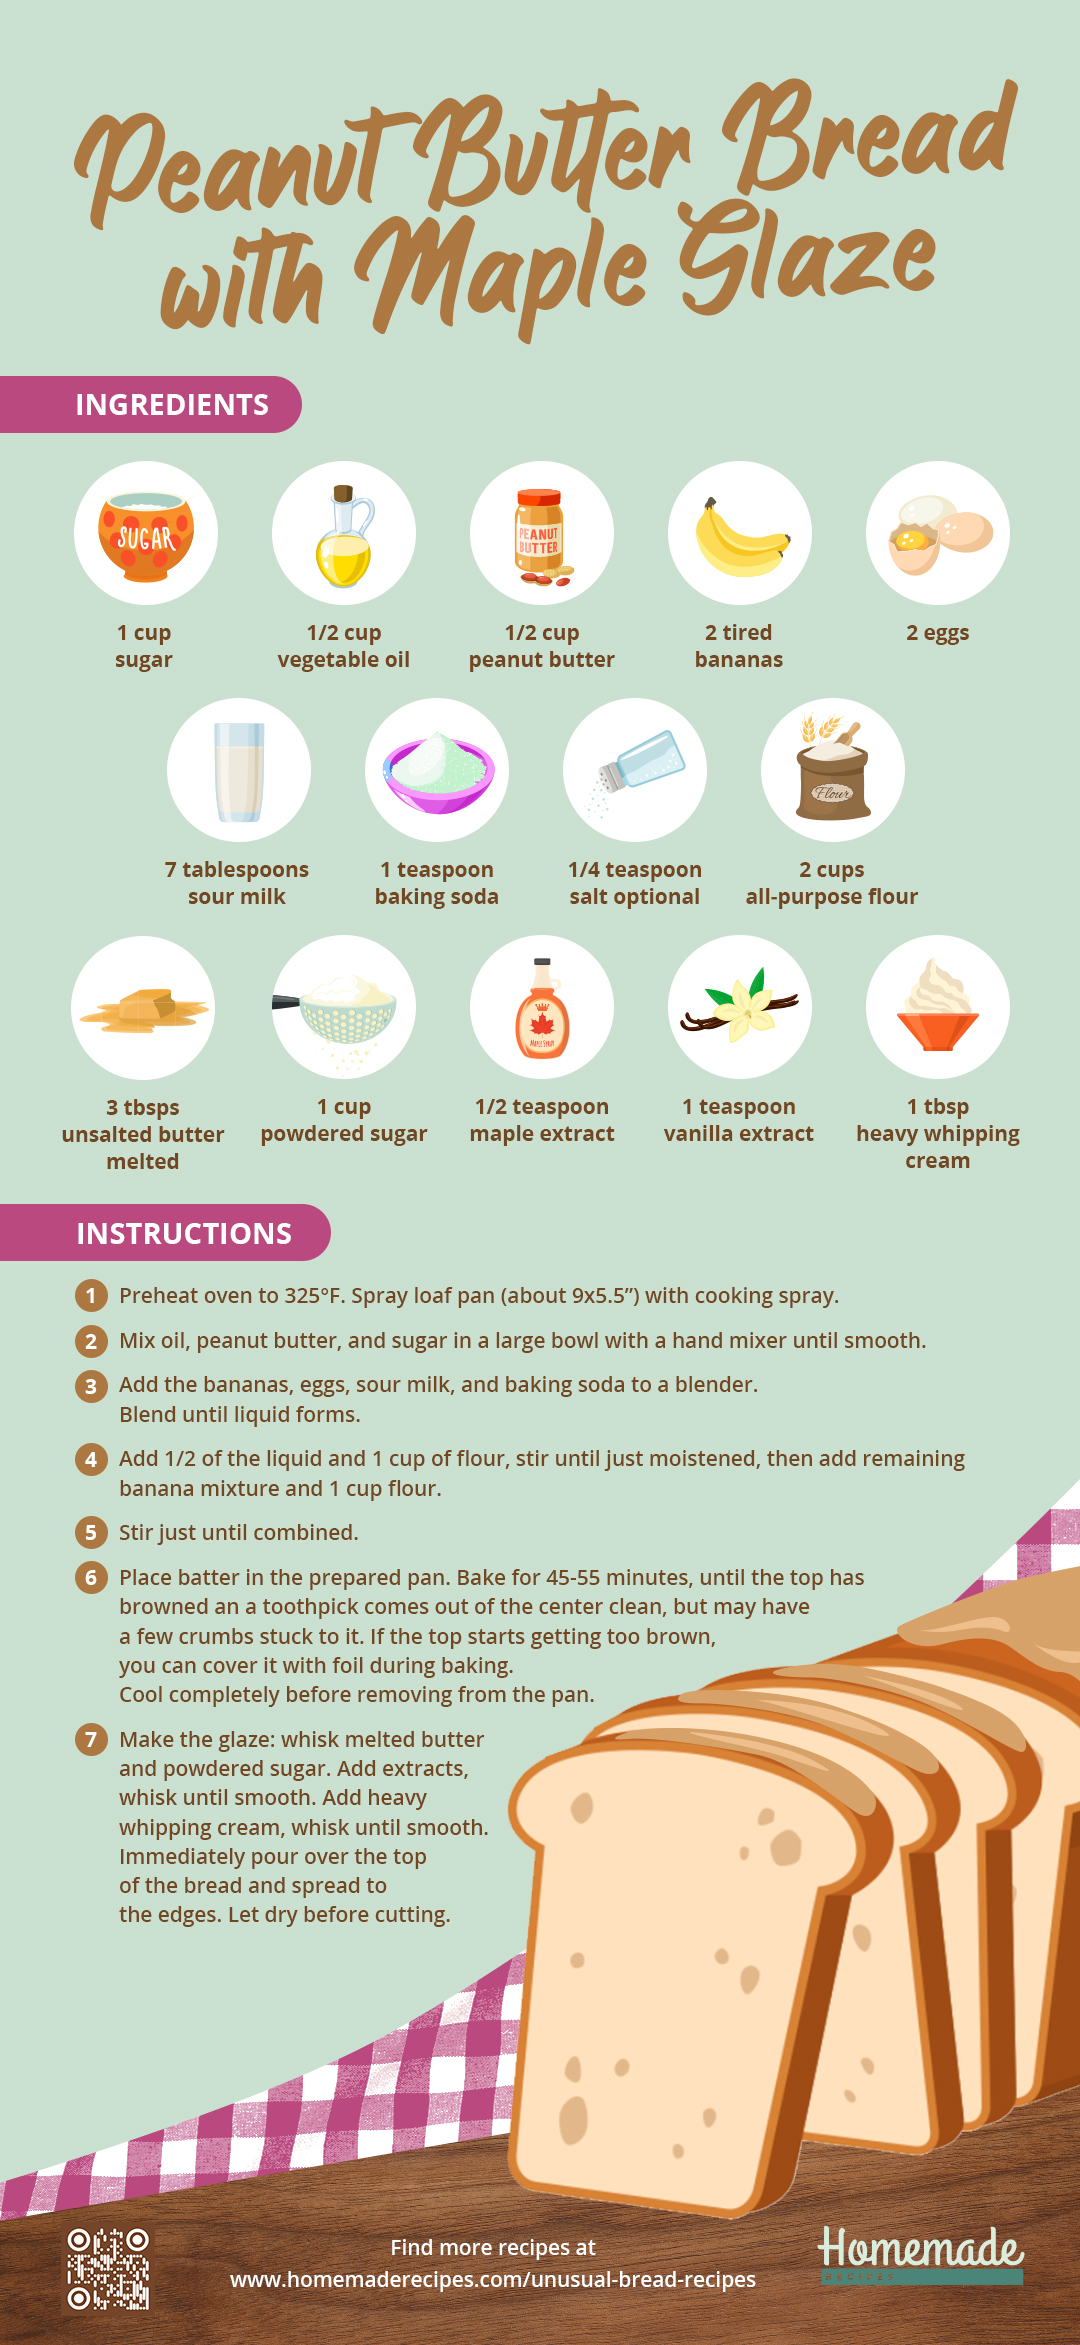 Peanut Butter Bread with Maple Glaze | Unusual Bread Recipes You Have To Try [INFOGRAPHIC]